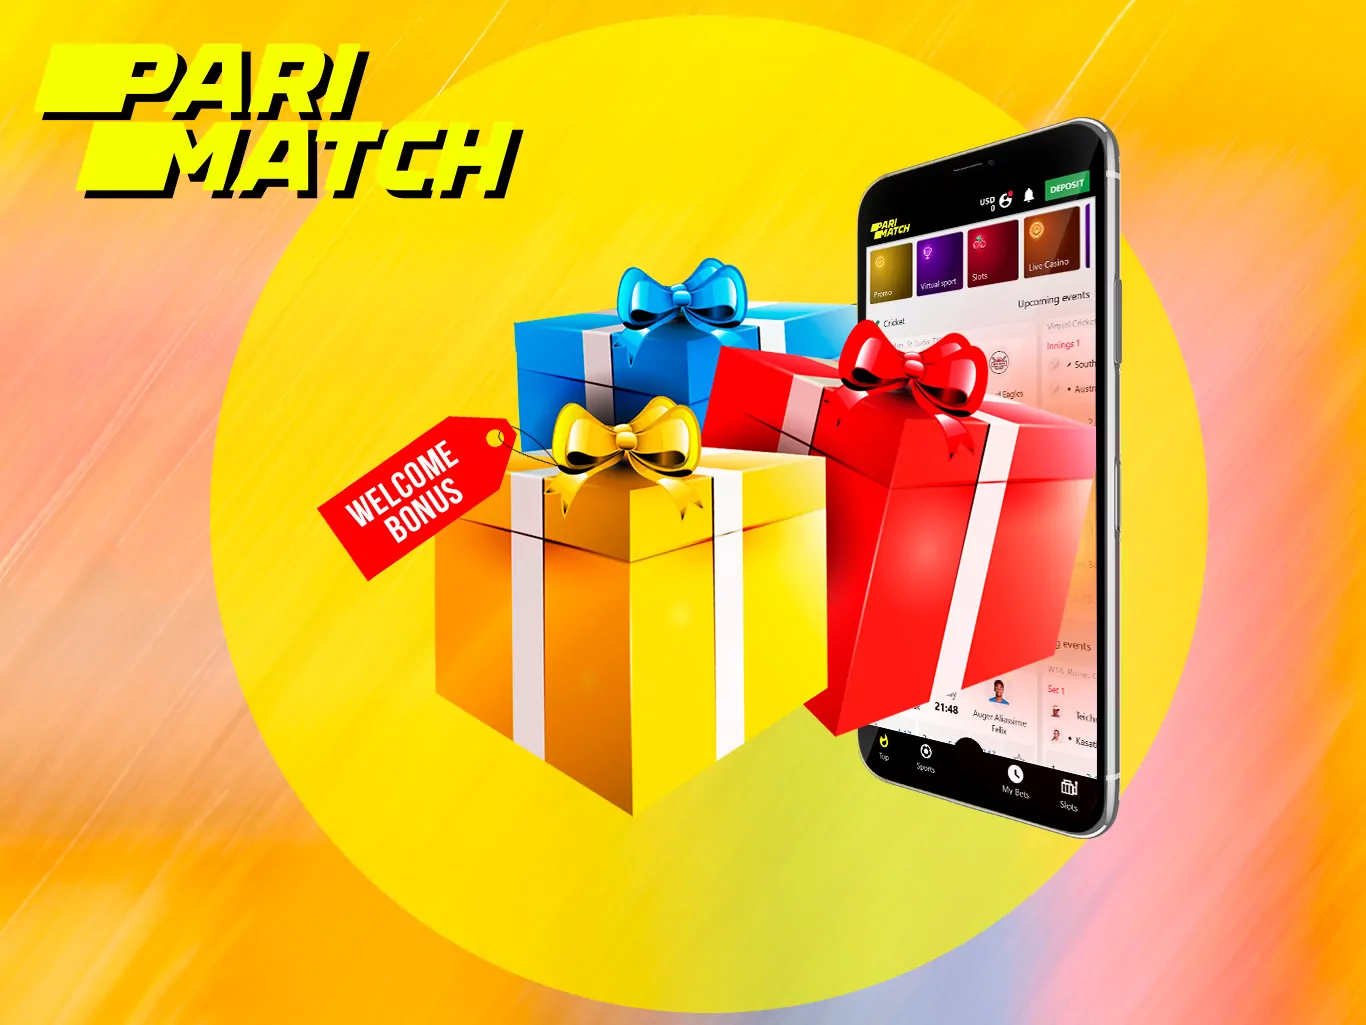 Everyone who registers with Parimatch will receive a pleasant surprise, regardless of where you have created an account in the application or on the website.